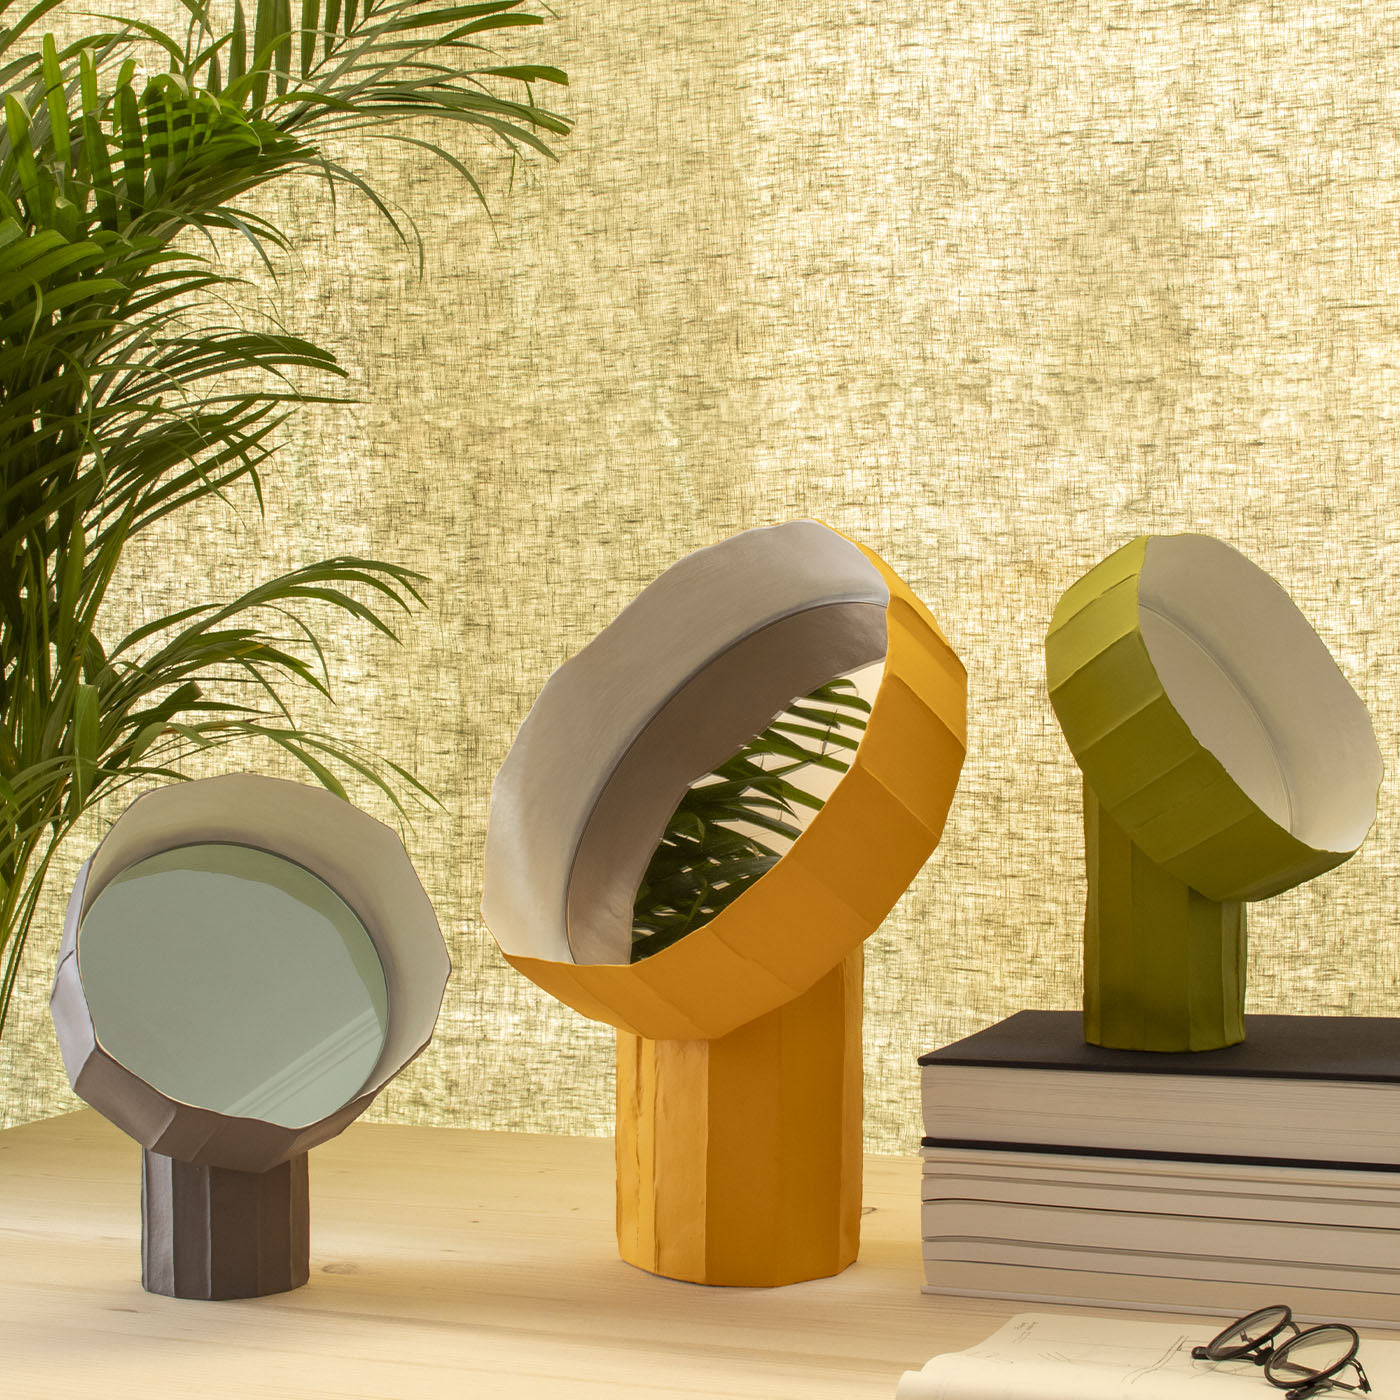 Girasole 20 Lime-Green Table Mirror by Paronetto and Botticelli - Alternative view 4